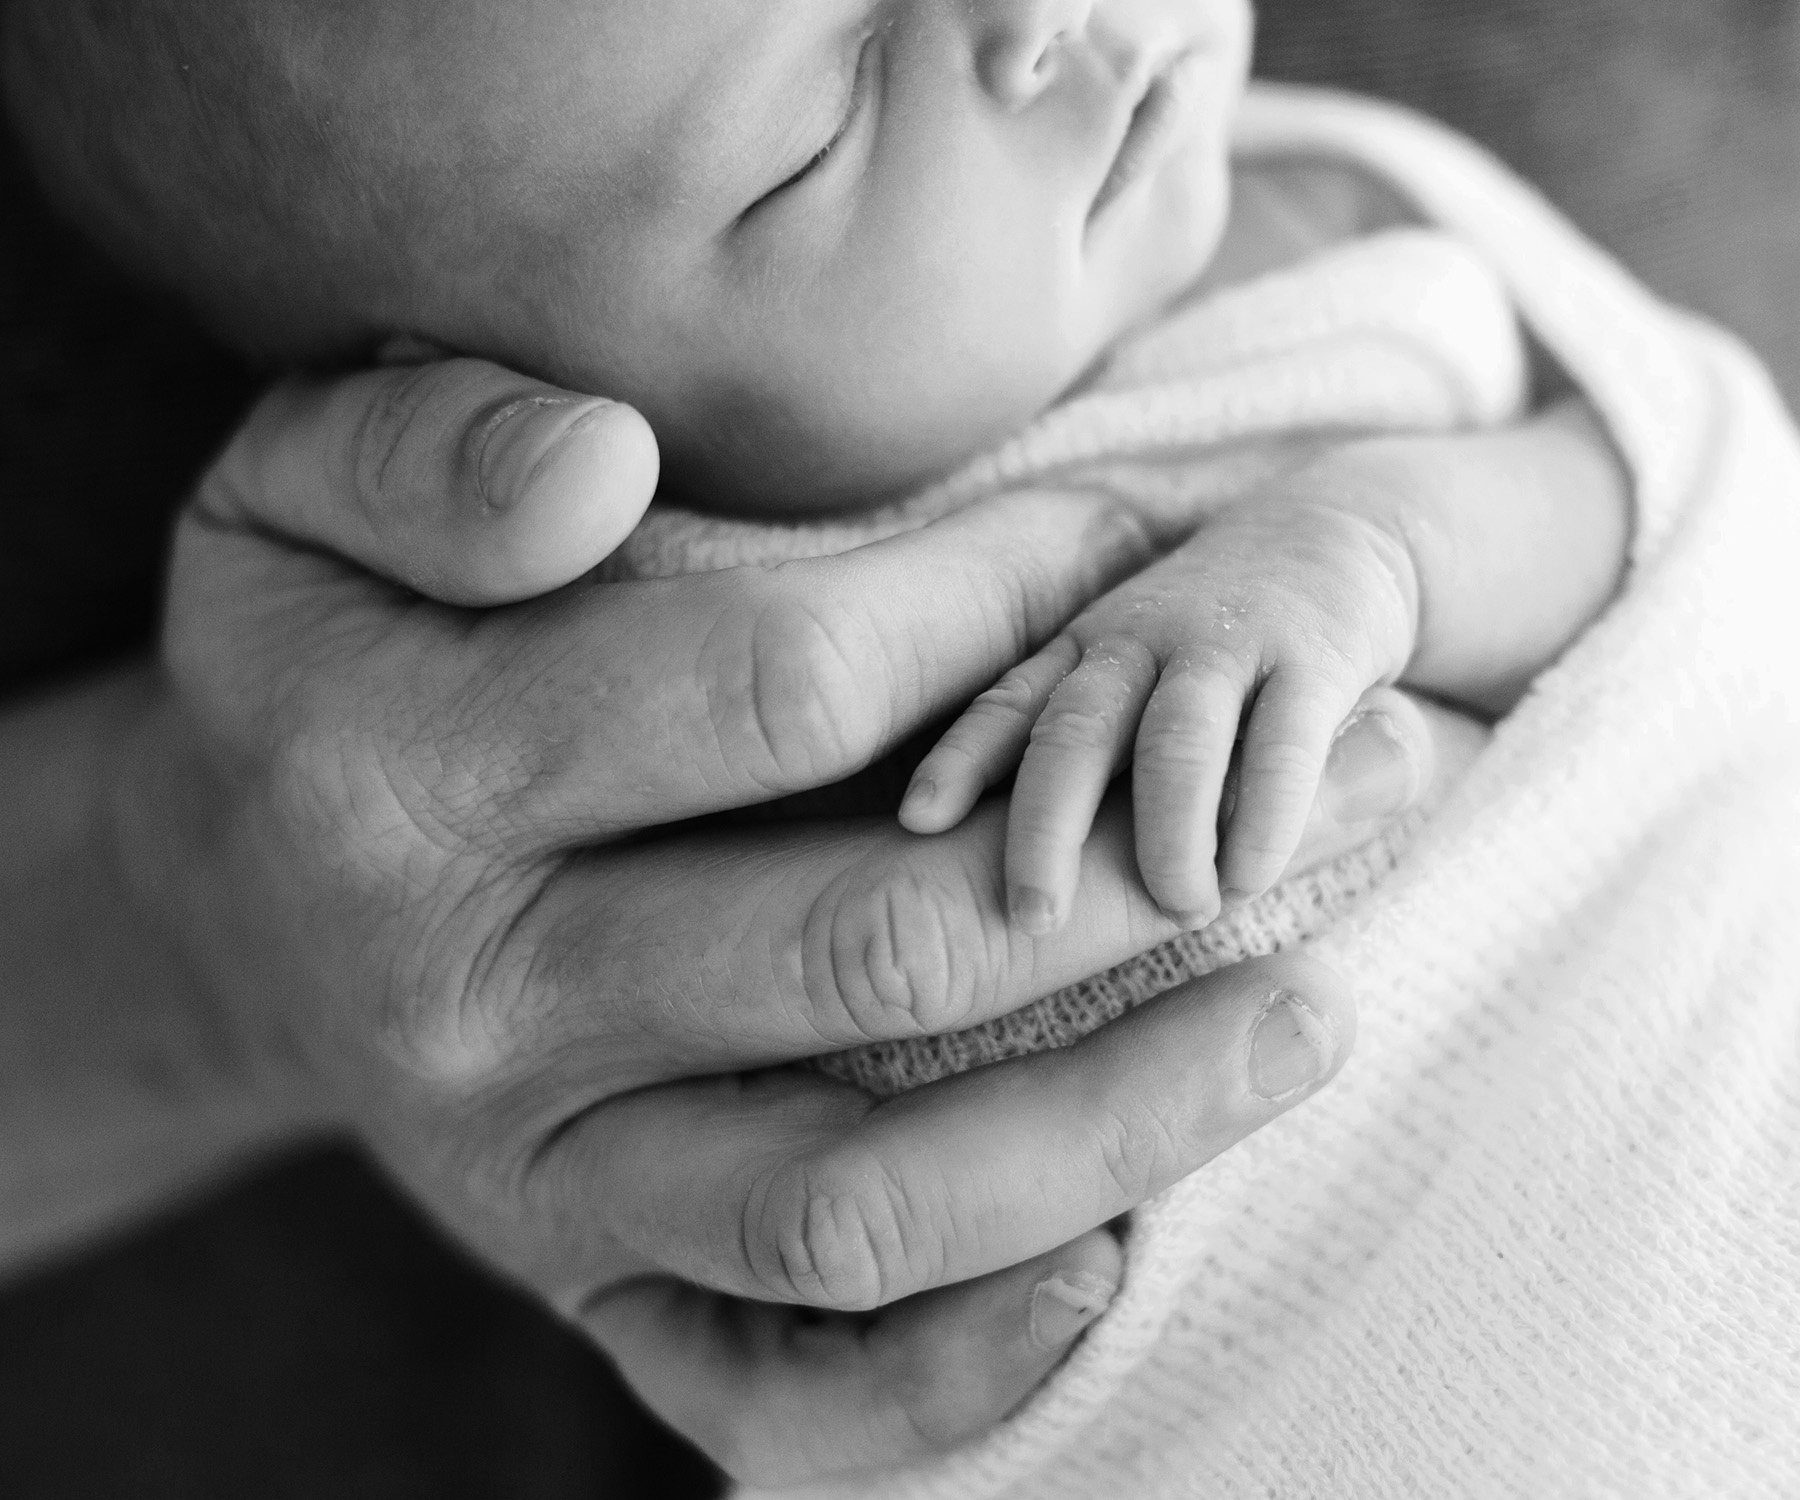 Louisville KY Newborn Photographer | Julie Brock Photography | maternity photographer | baby first year photos | family photographer | dad and baby hands.jpg